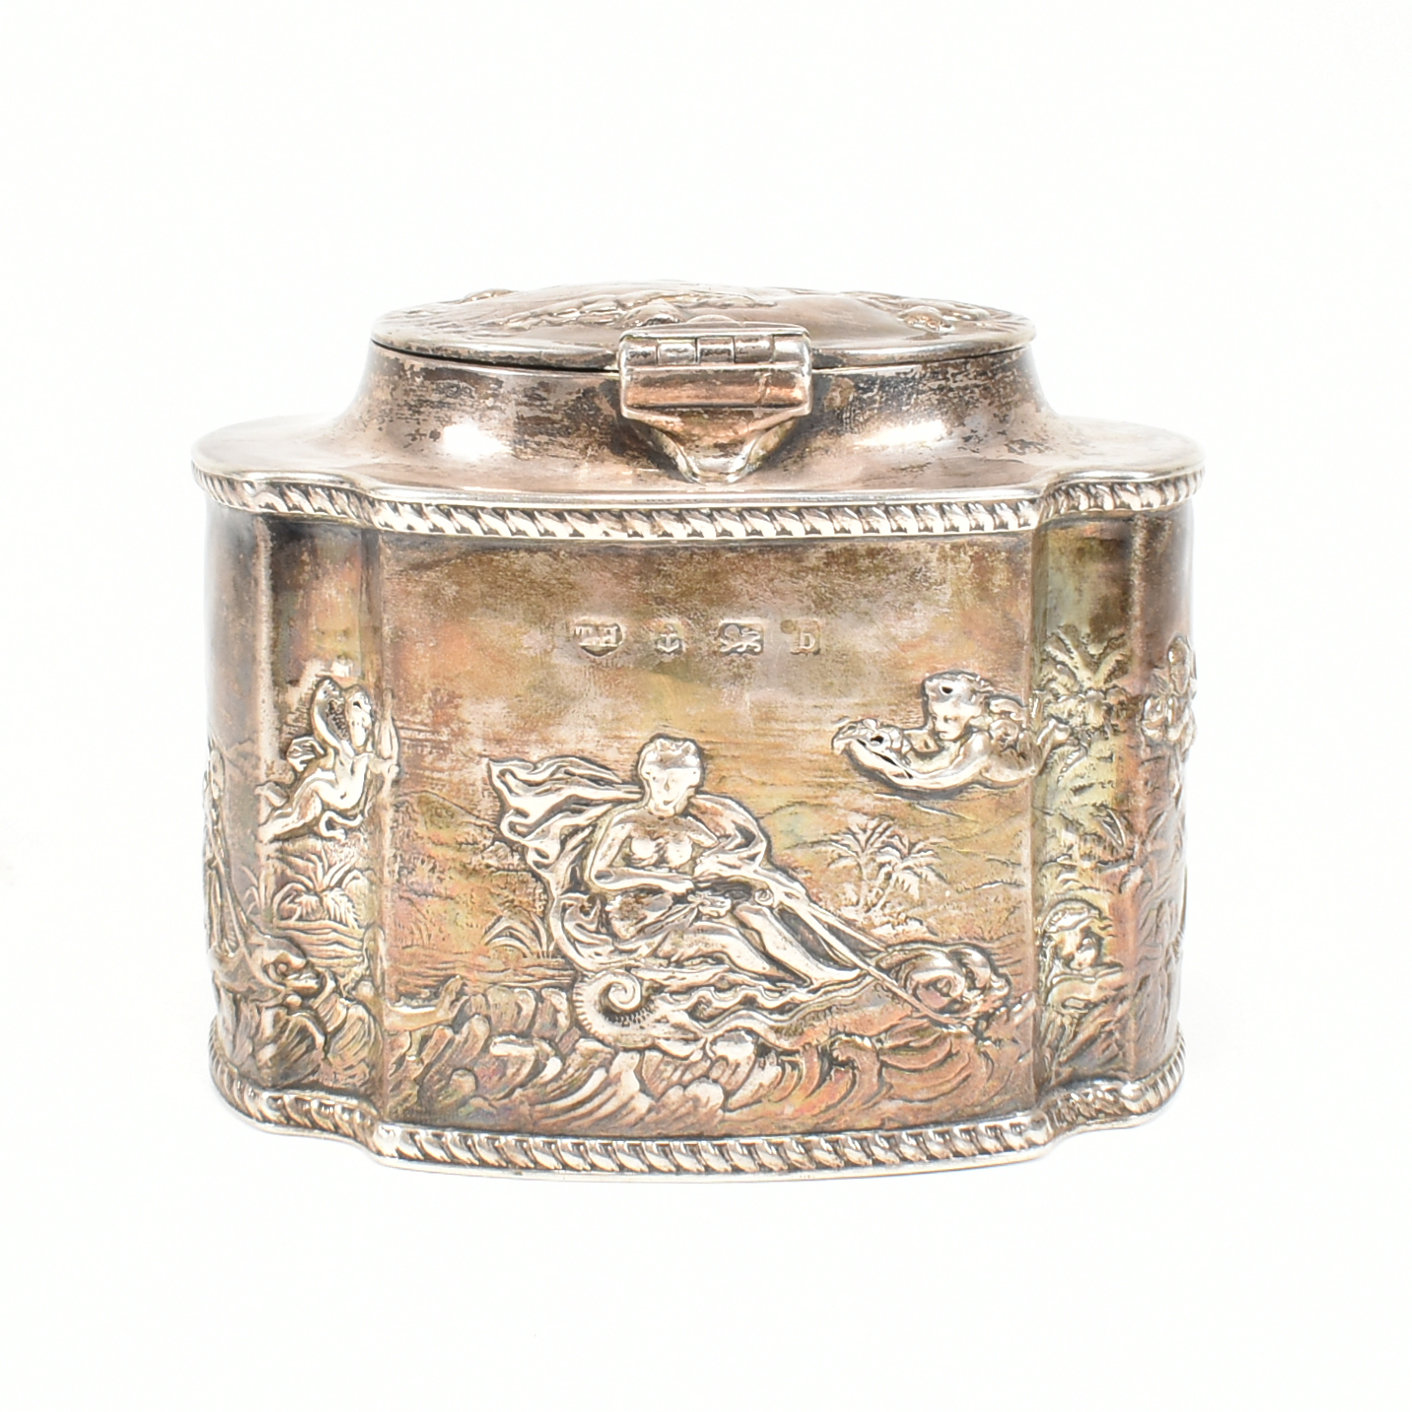 LATE VICTORIAN HALLMARKED SILVER TEA CADDY - Image 3 of 9